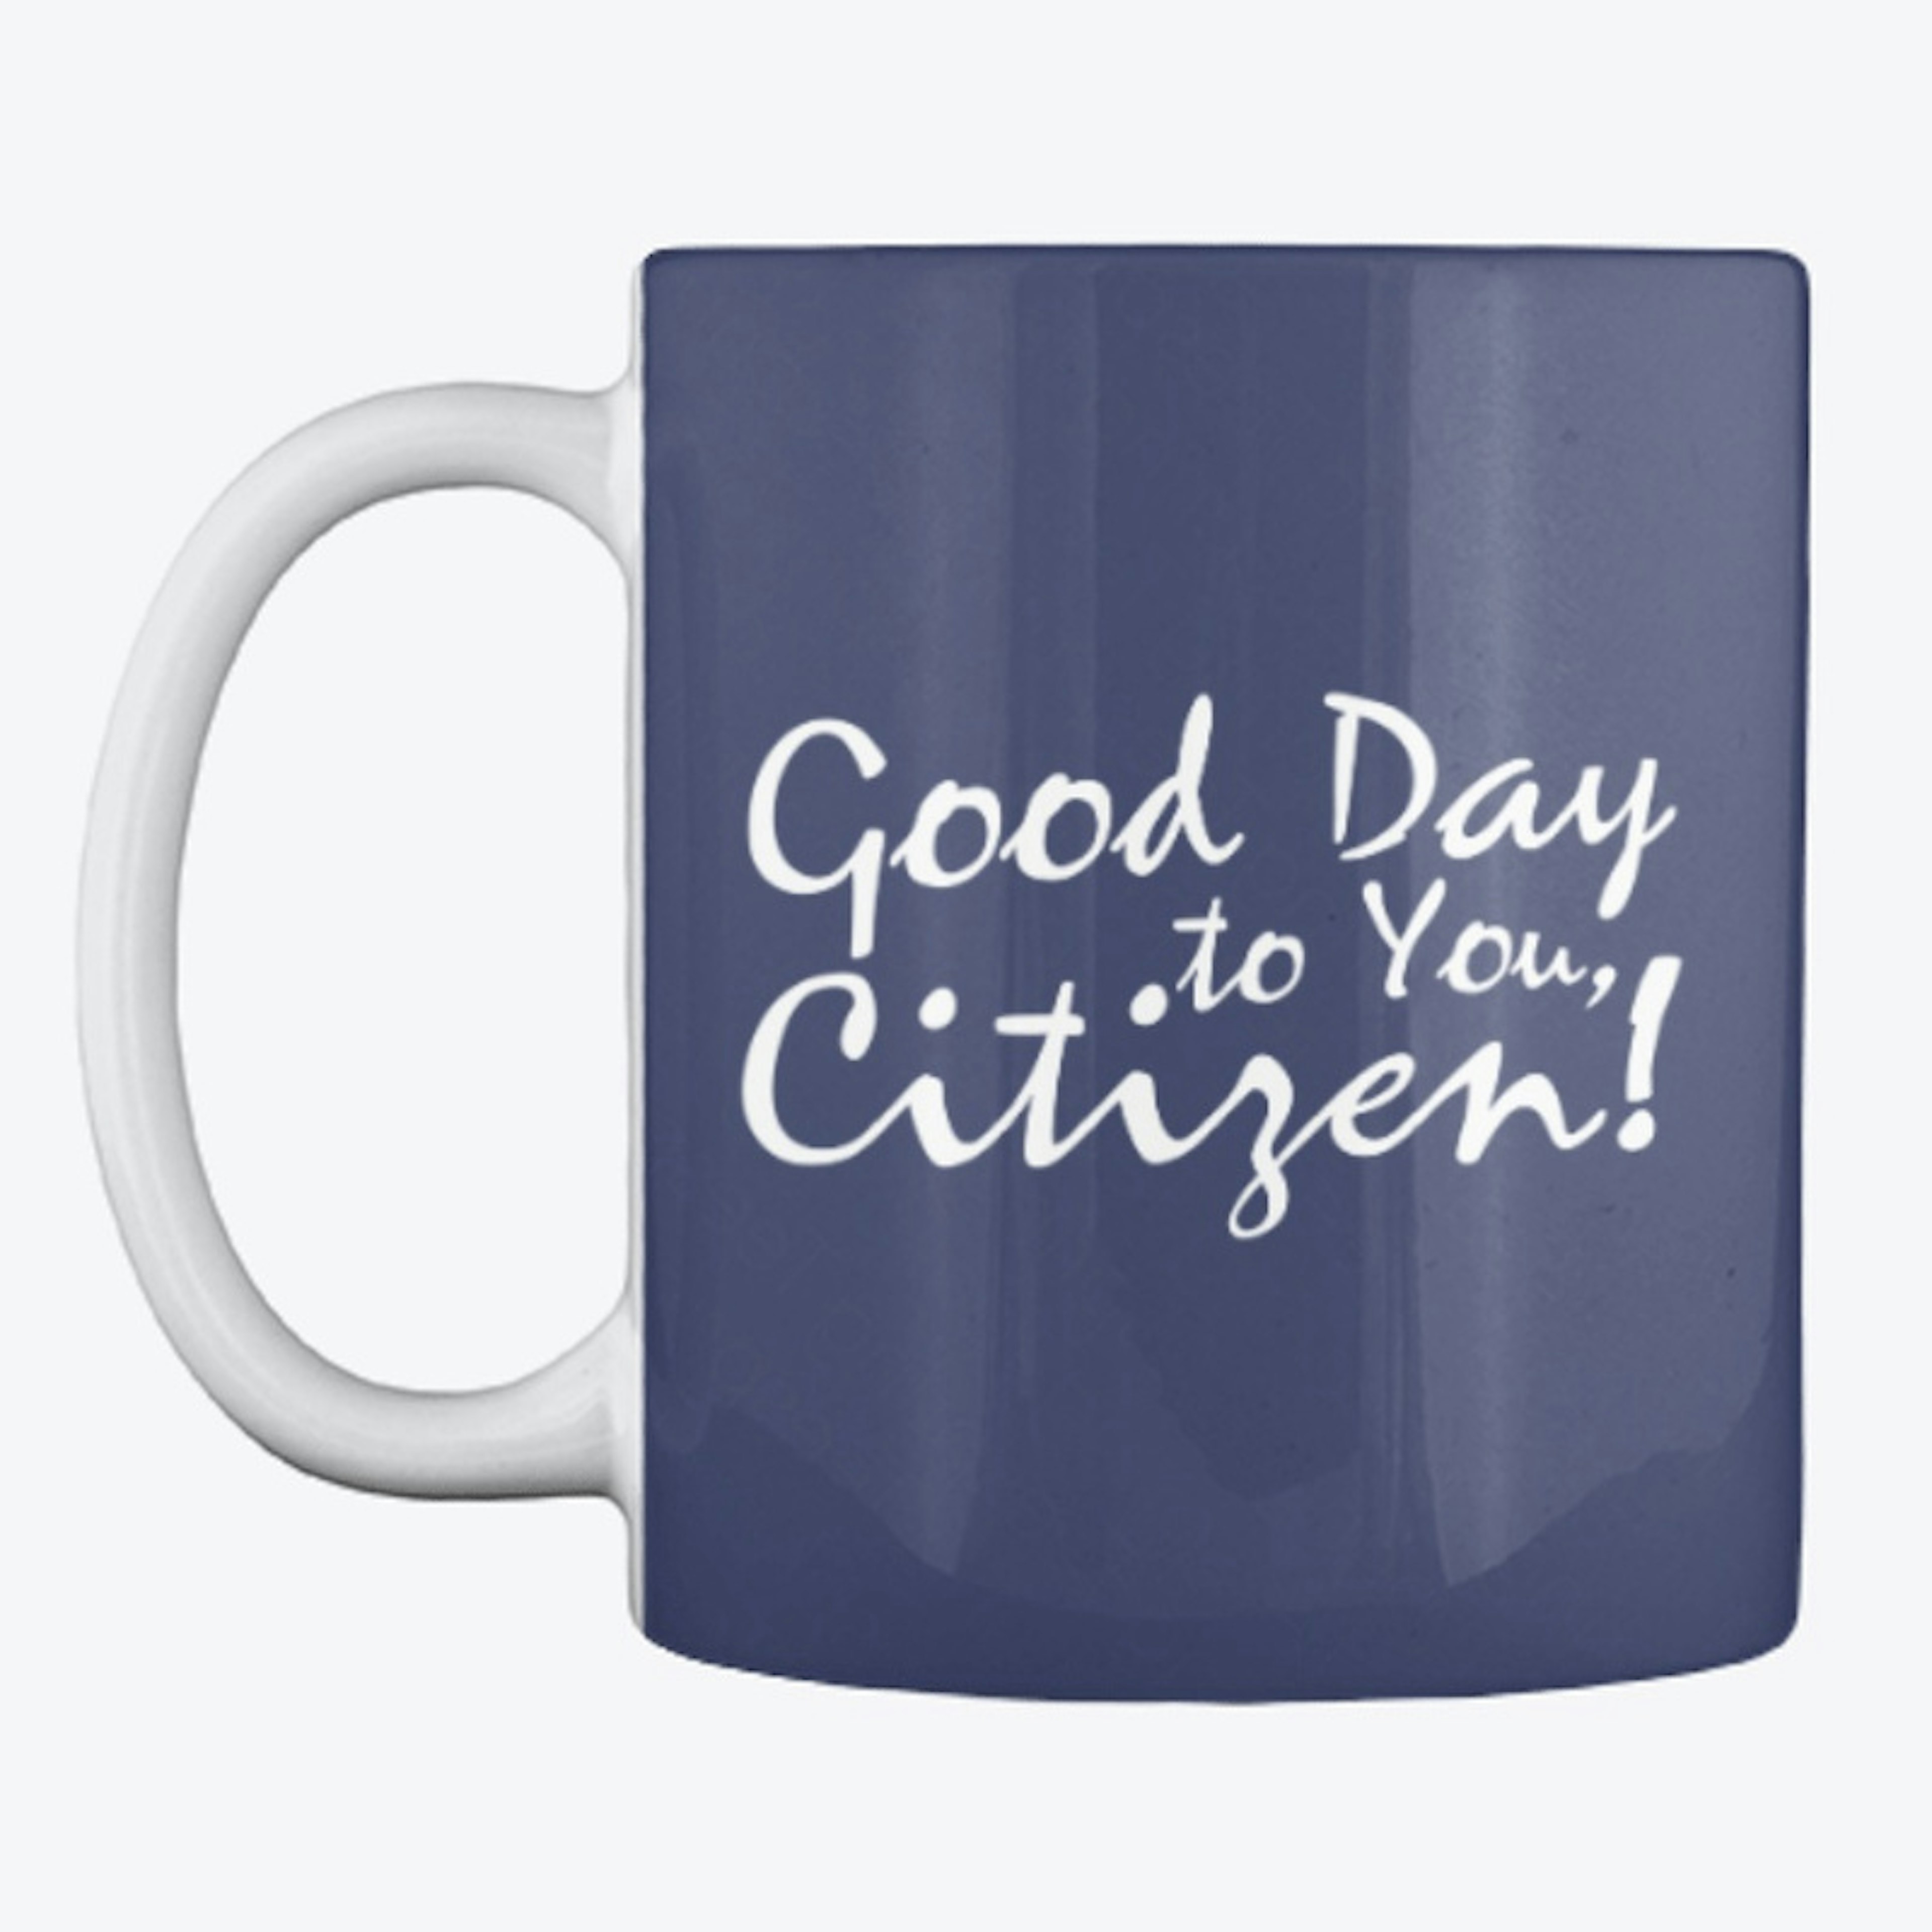 Good Day to You, Citizen! (Blue)